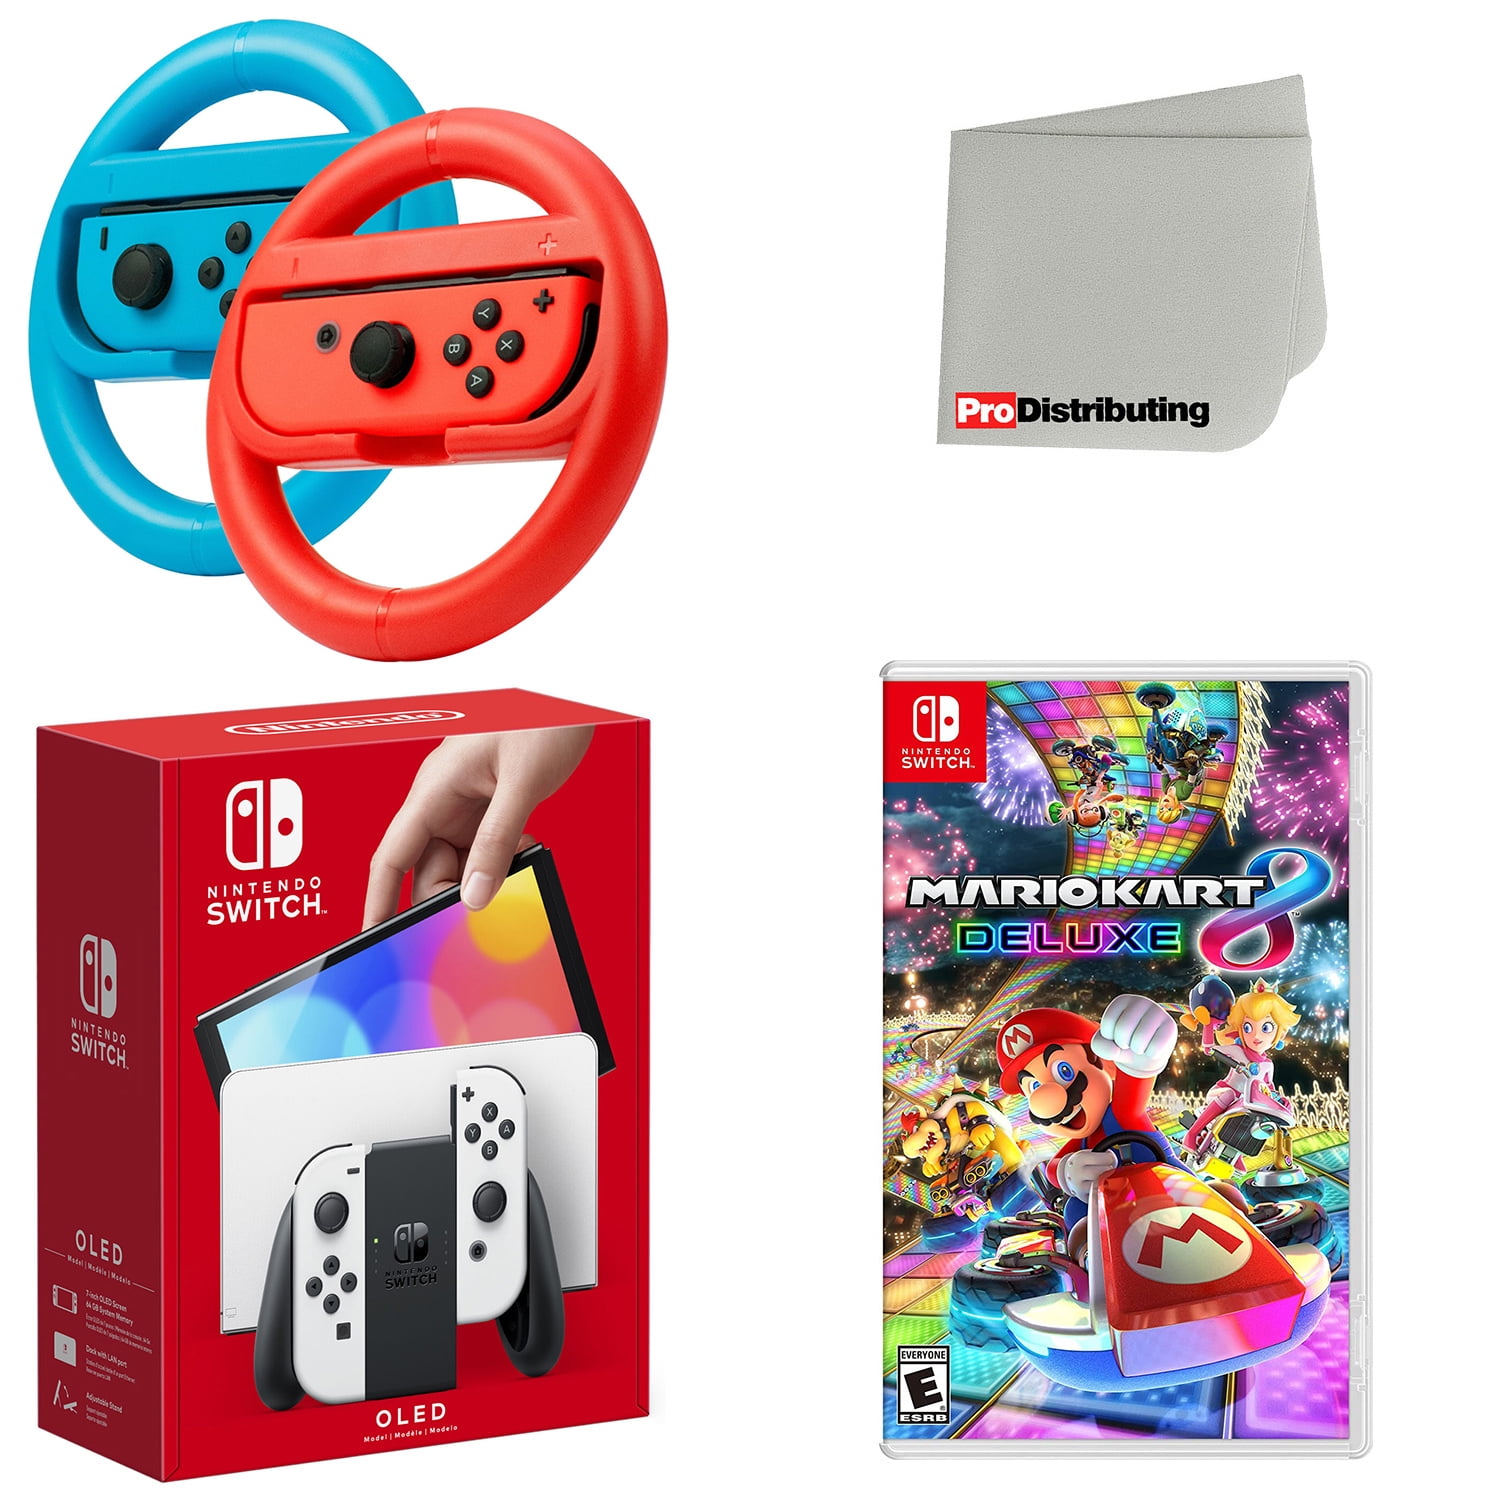 Nintendo Switch OLED White with Mario Kart 8 Deluxe Game Bundle